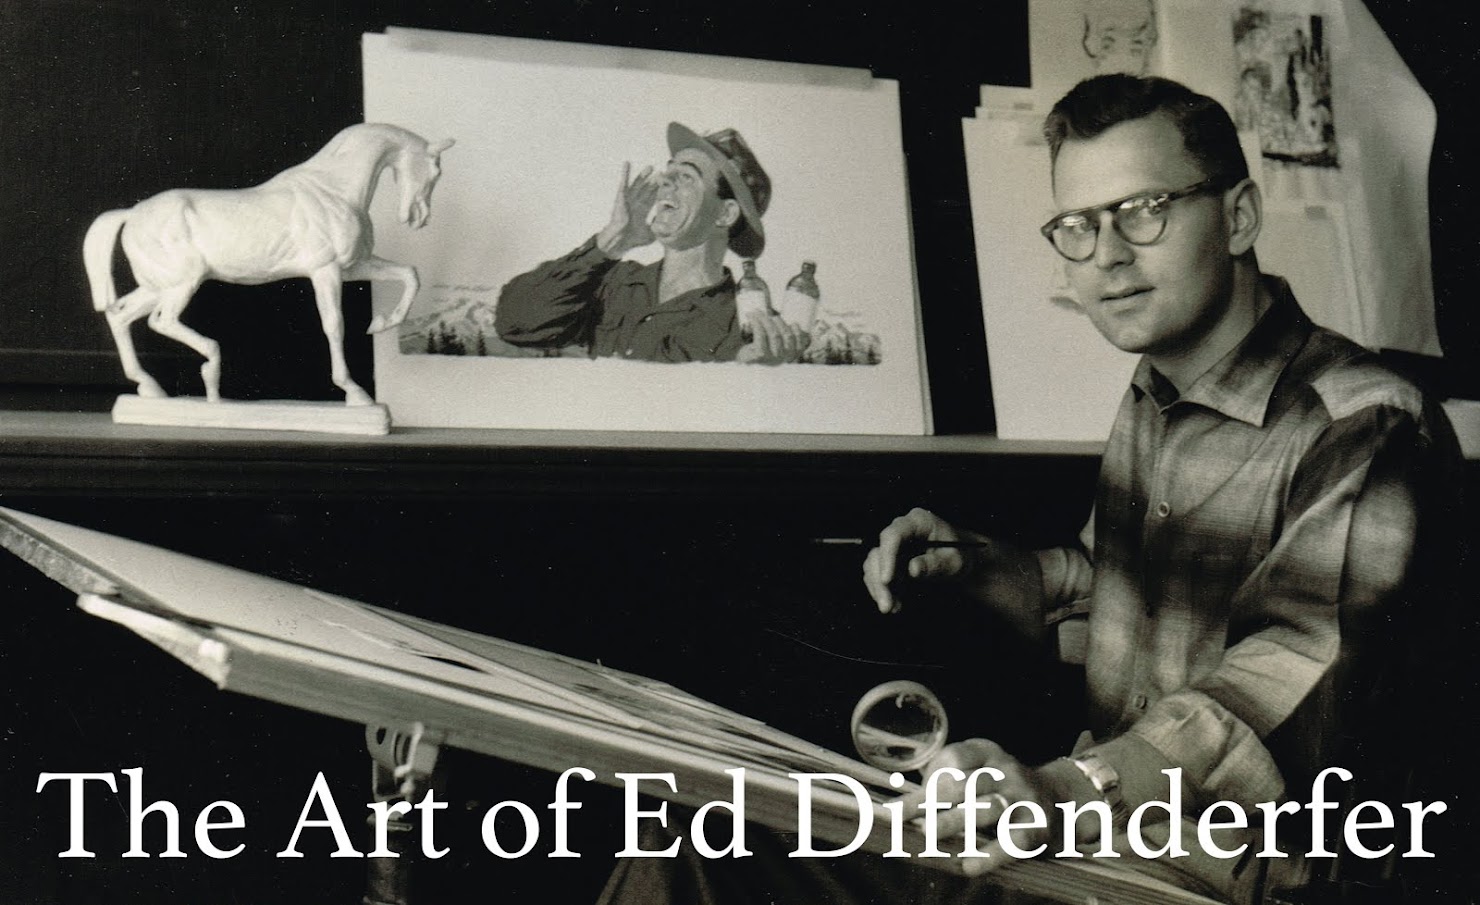 The Art of Ed Diffenderfer